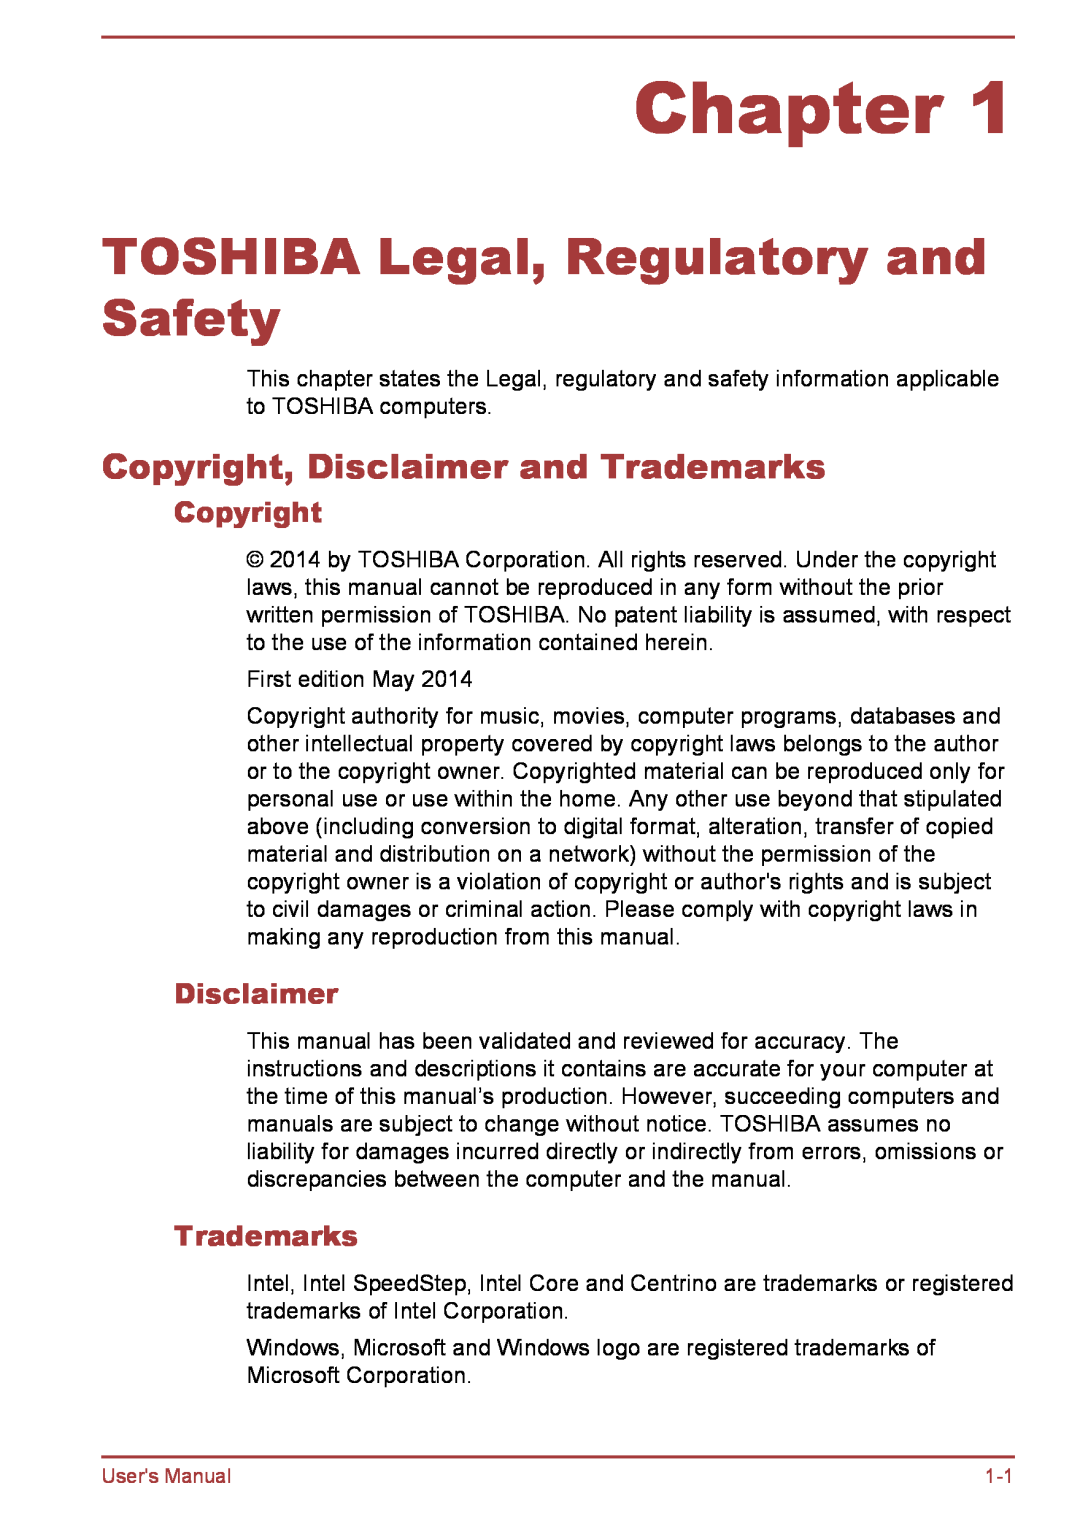 Toshiba L35W-B, L30W-B user manual Chapter, TOSHIBA Legal, Regulatory and Safety, Copyright, Disclaimer and Trademarks 